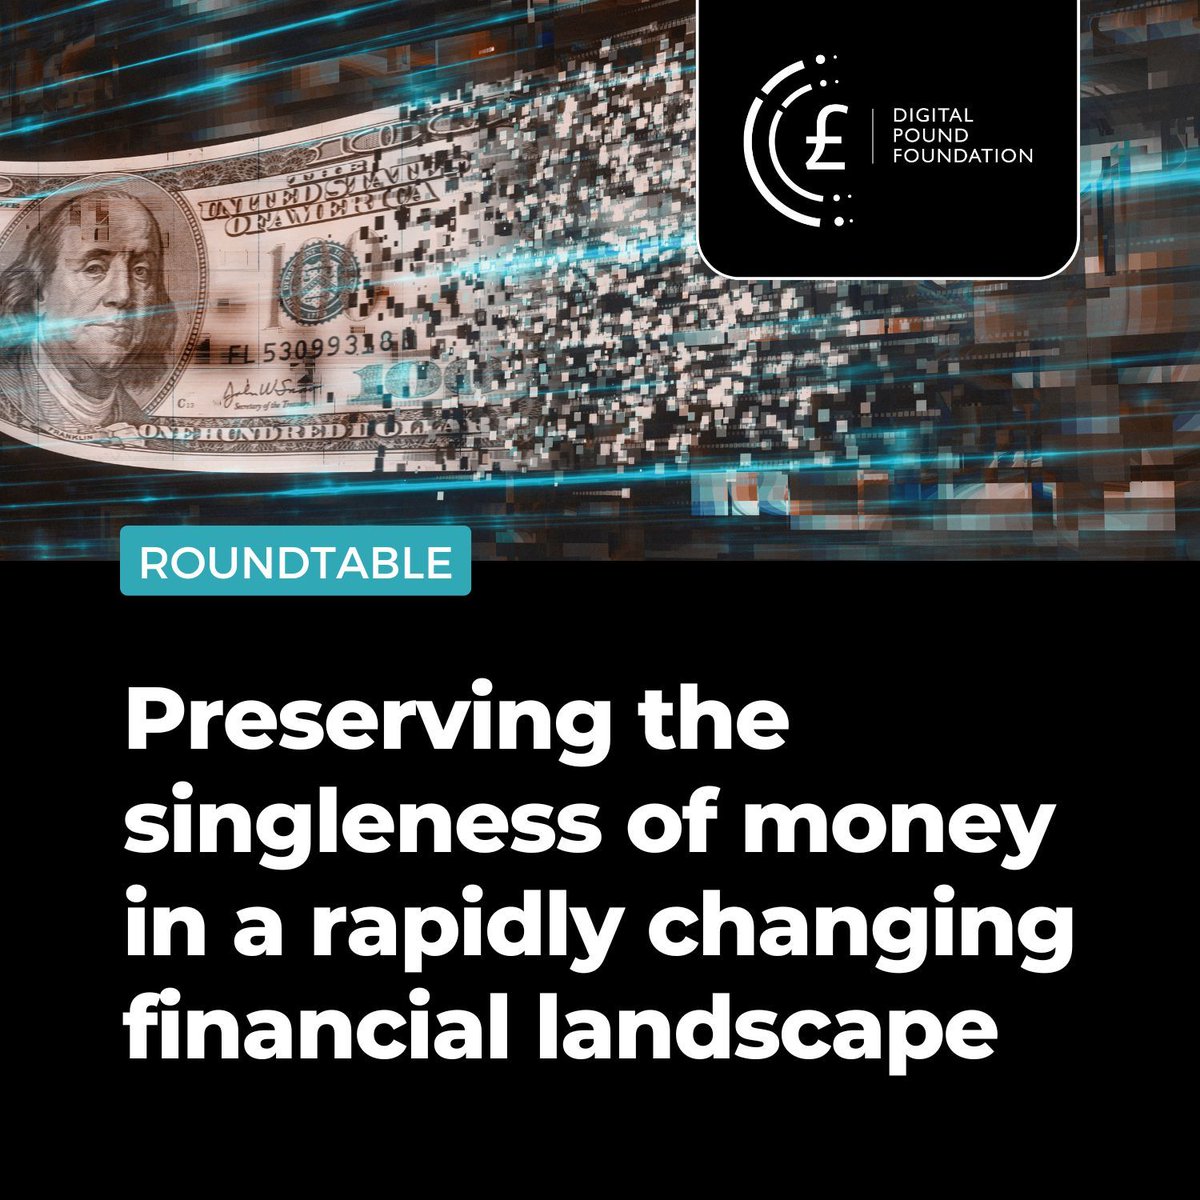 Preserving the singleness of #money will become ever more important as we move away from #cash. In our recent roundtable, we discussed - What challenges do #digitalcurrencies present? What happens if singleness is not preserved? Read the full write-up 👉 buff.ly/4b0E9k8